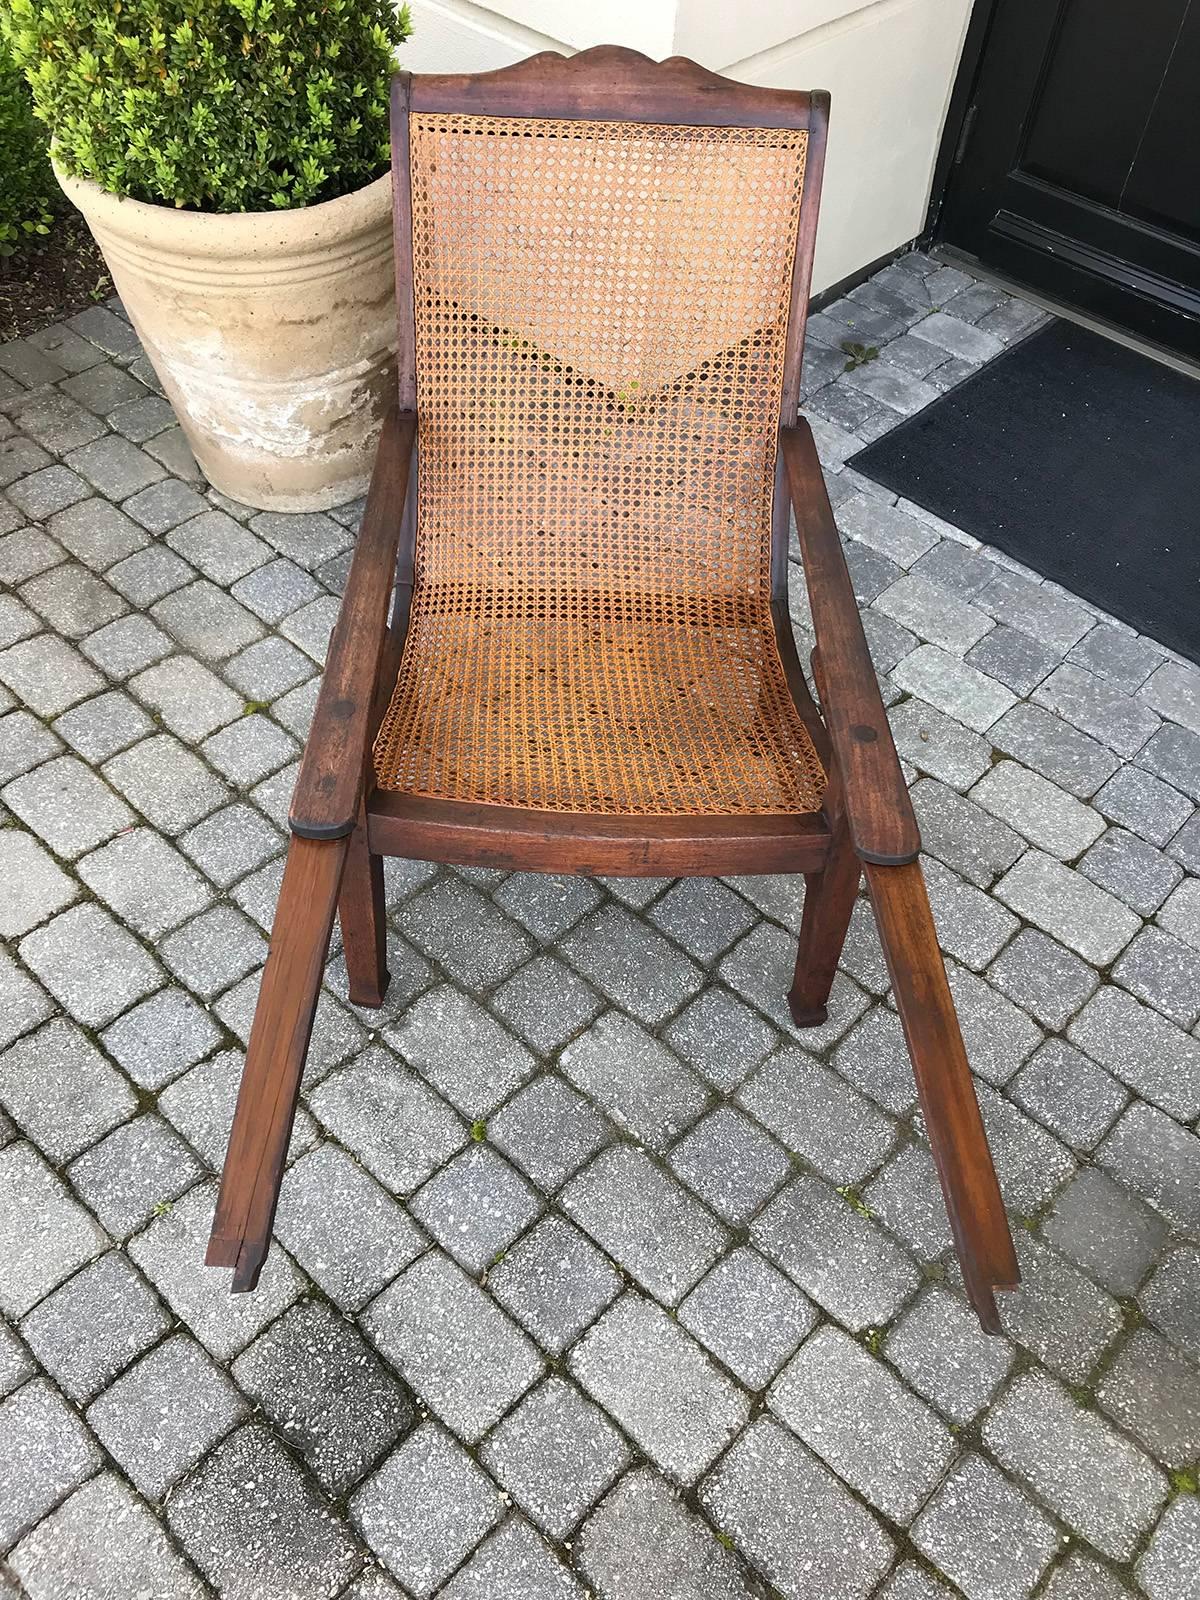 Cane Early 19th Century West Indies Planters Chair